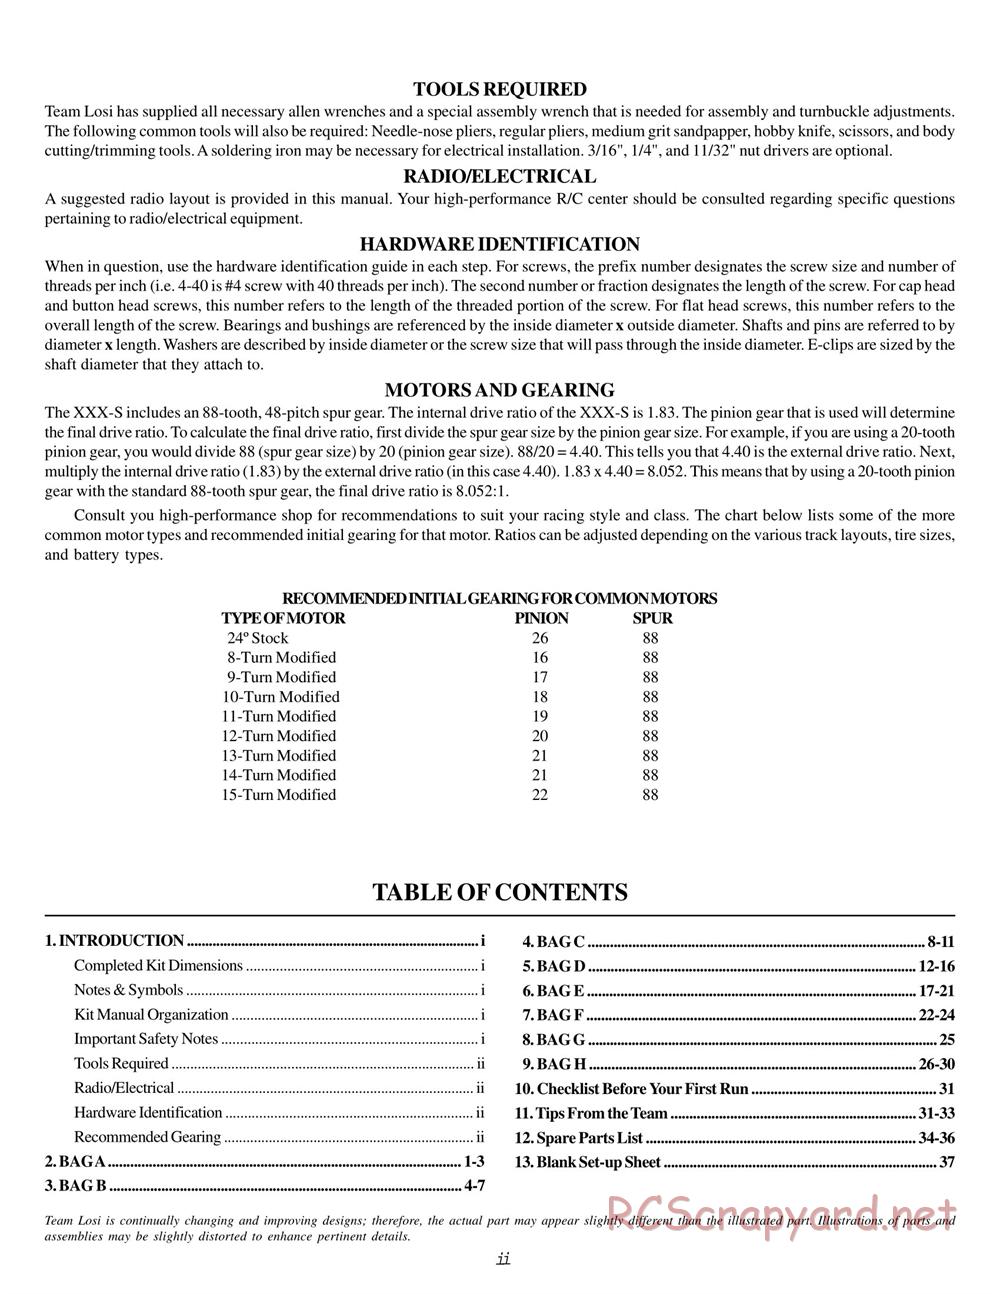 Team Losi - XXX-S - Manual - Page 3